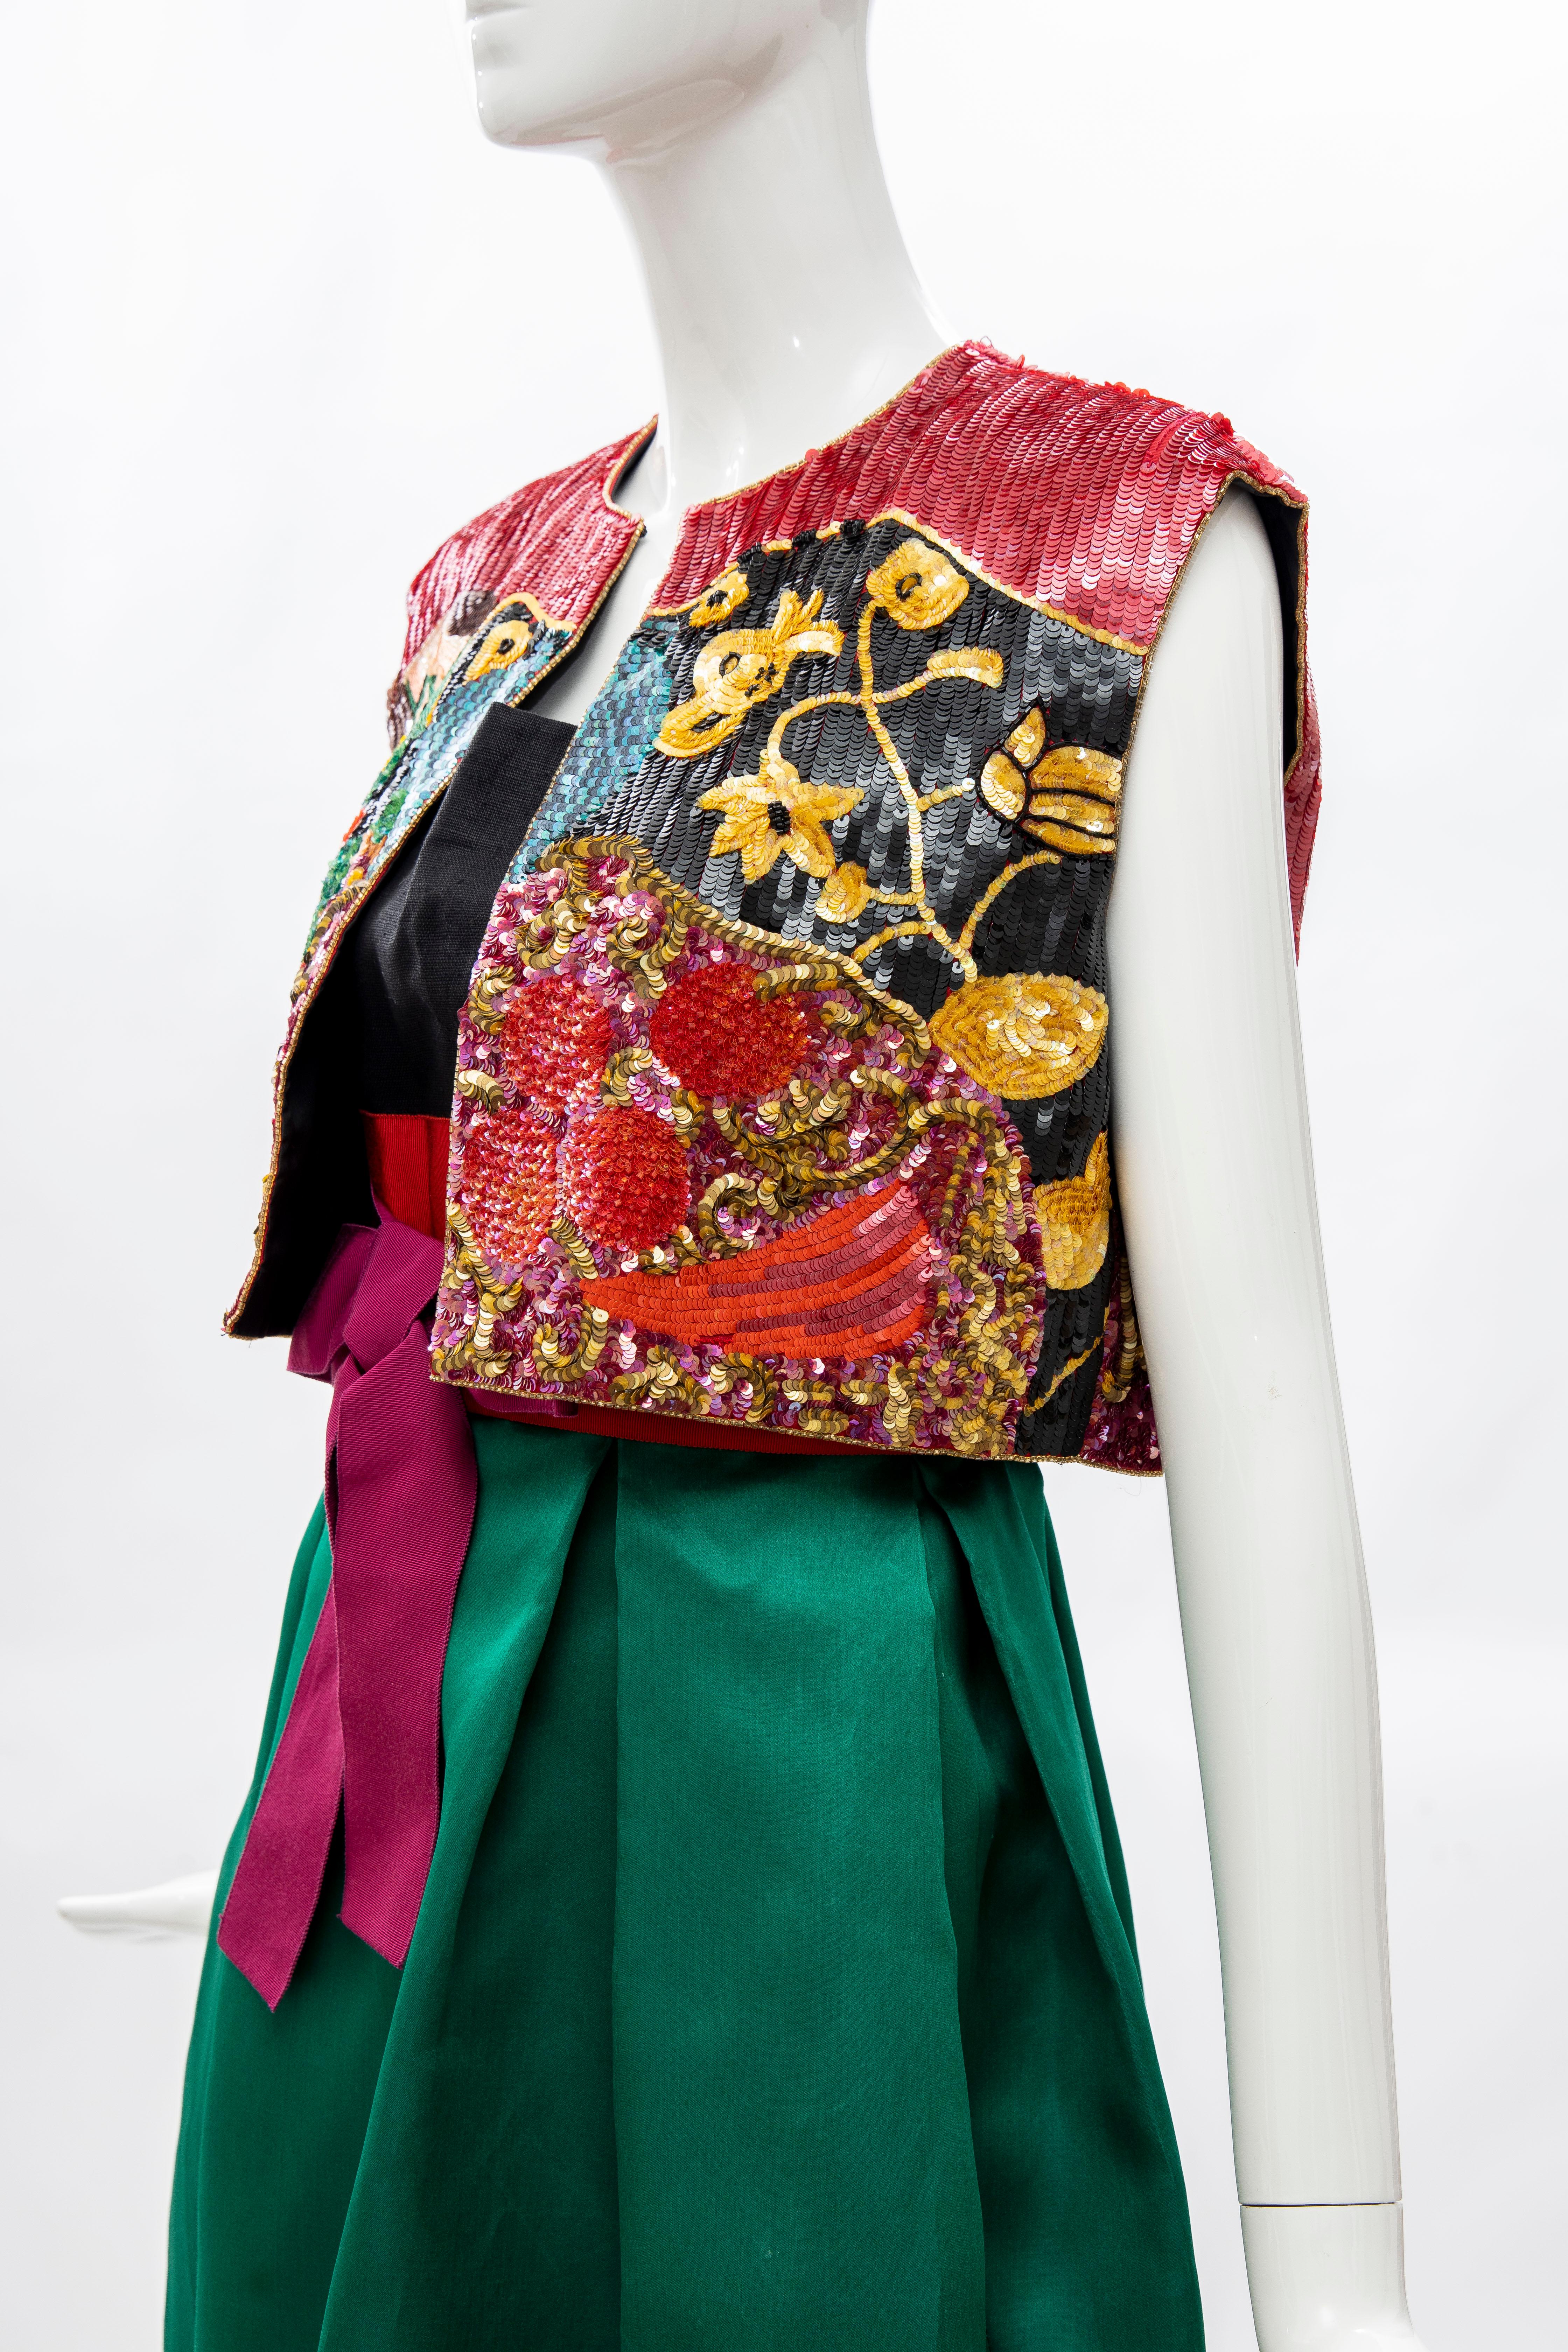 Bill Blass Matisse Inspired Embroidered Sequined Dress Ensemble, Spring 1988 For Sale 10